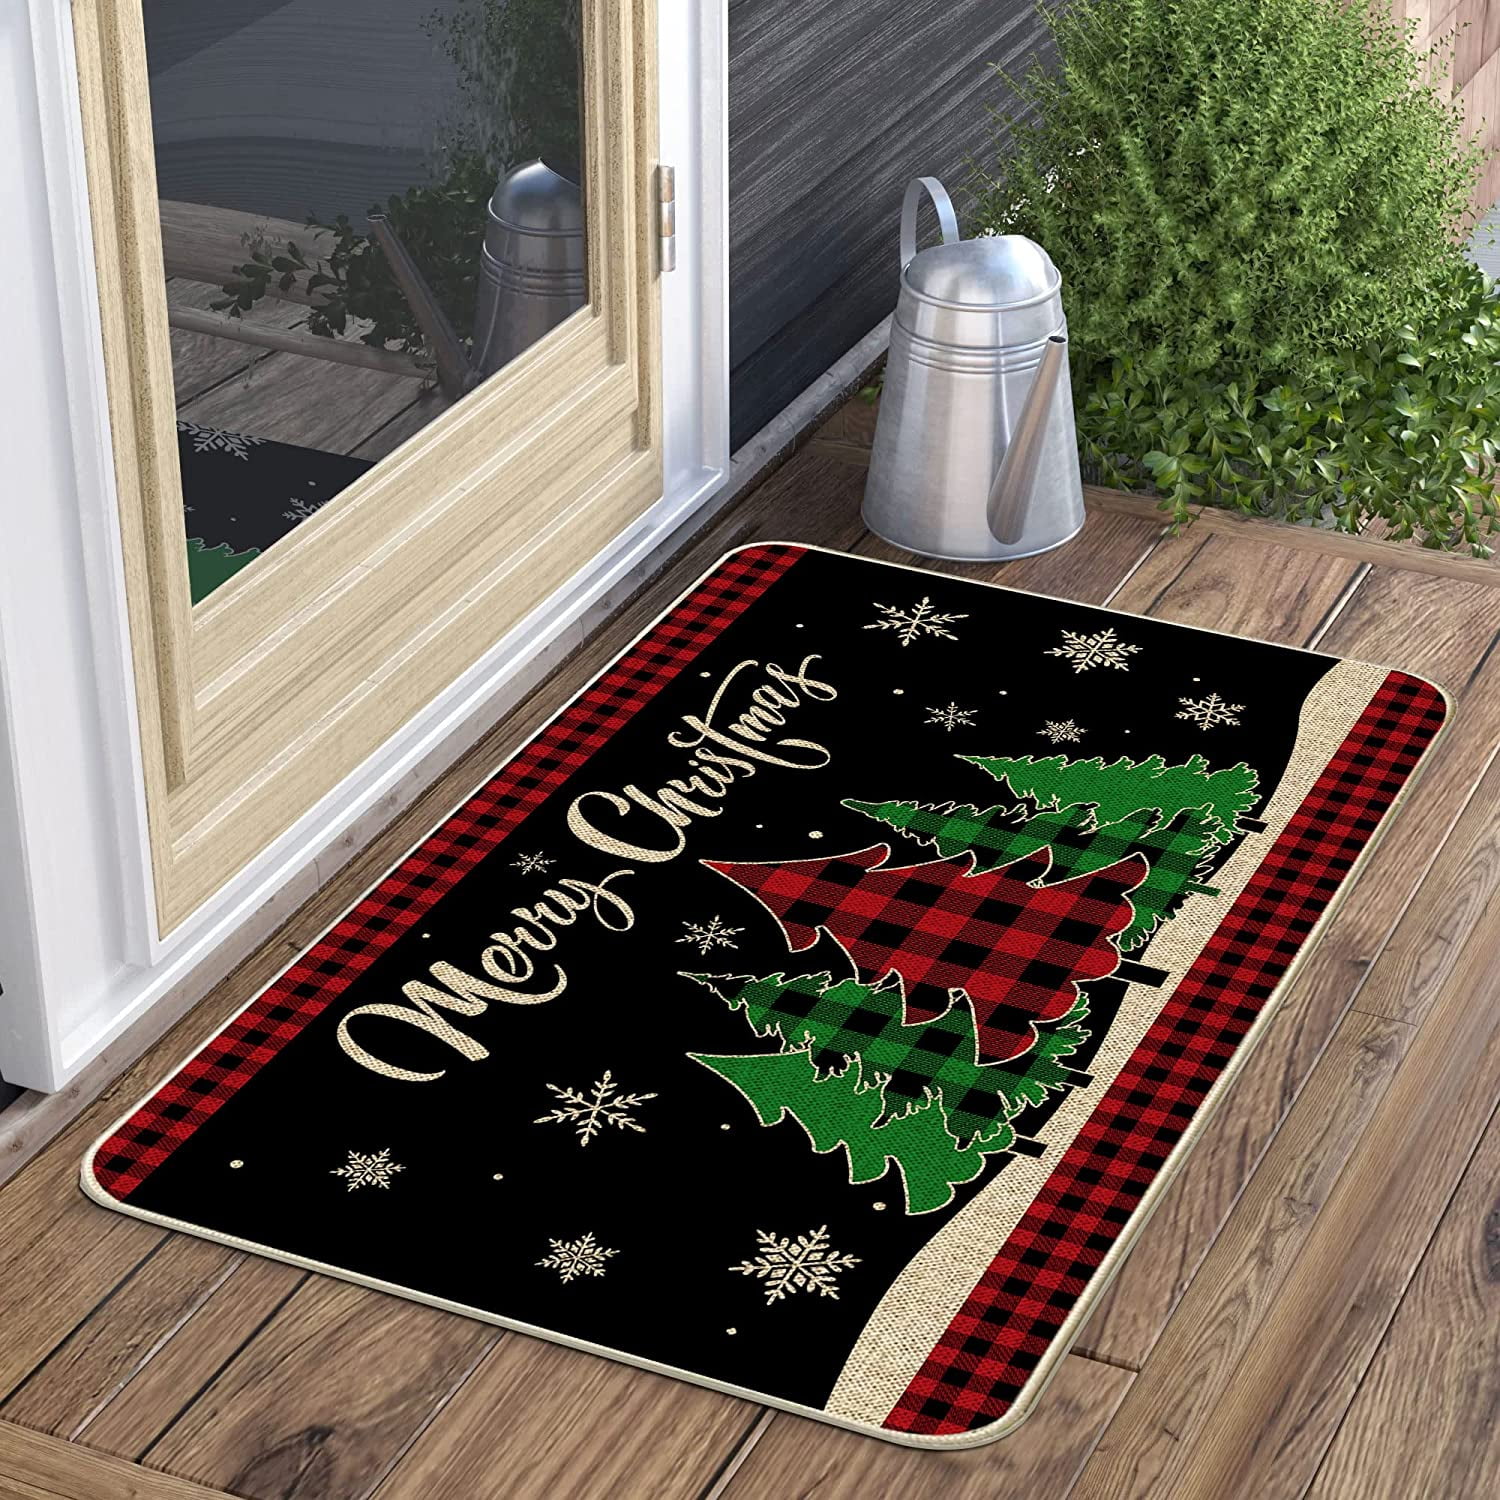 Decorative Entryway Door Mat Area Rug - Winter Blessings 30x18 - Christmas  Collection from Primitives by Kathy - Cherryland Sales